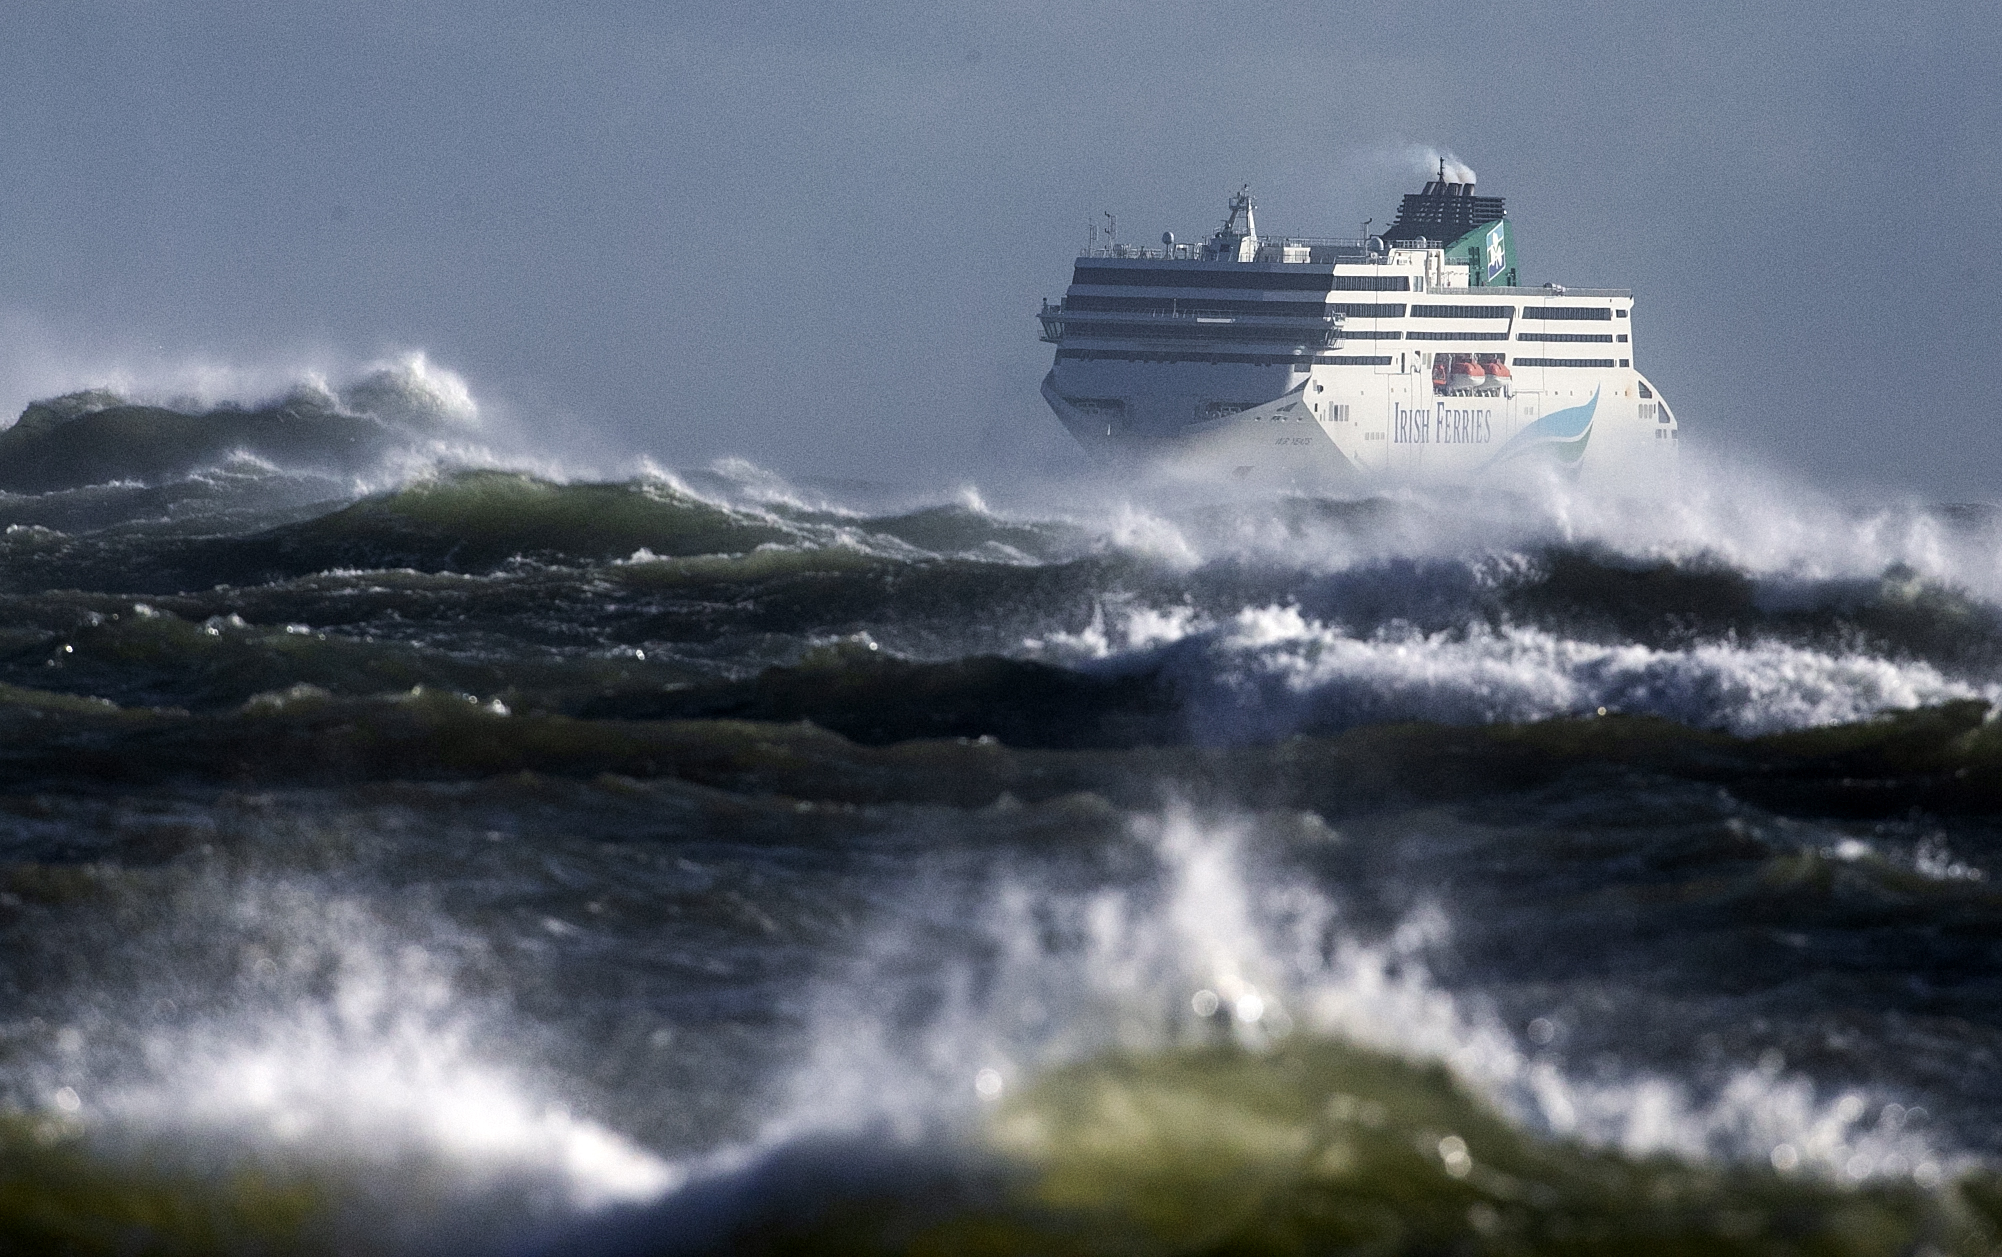 The W.B Yeats ferry makes its way through stormy waves in Dublin Bay, 31-10-2020. Image: Sam Boal/RollingNews